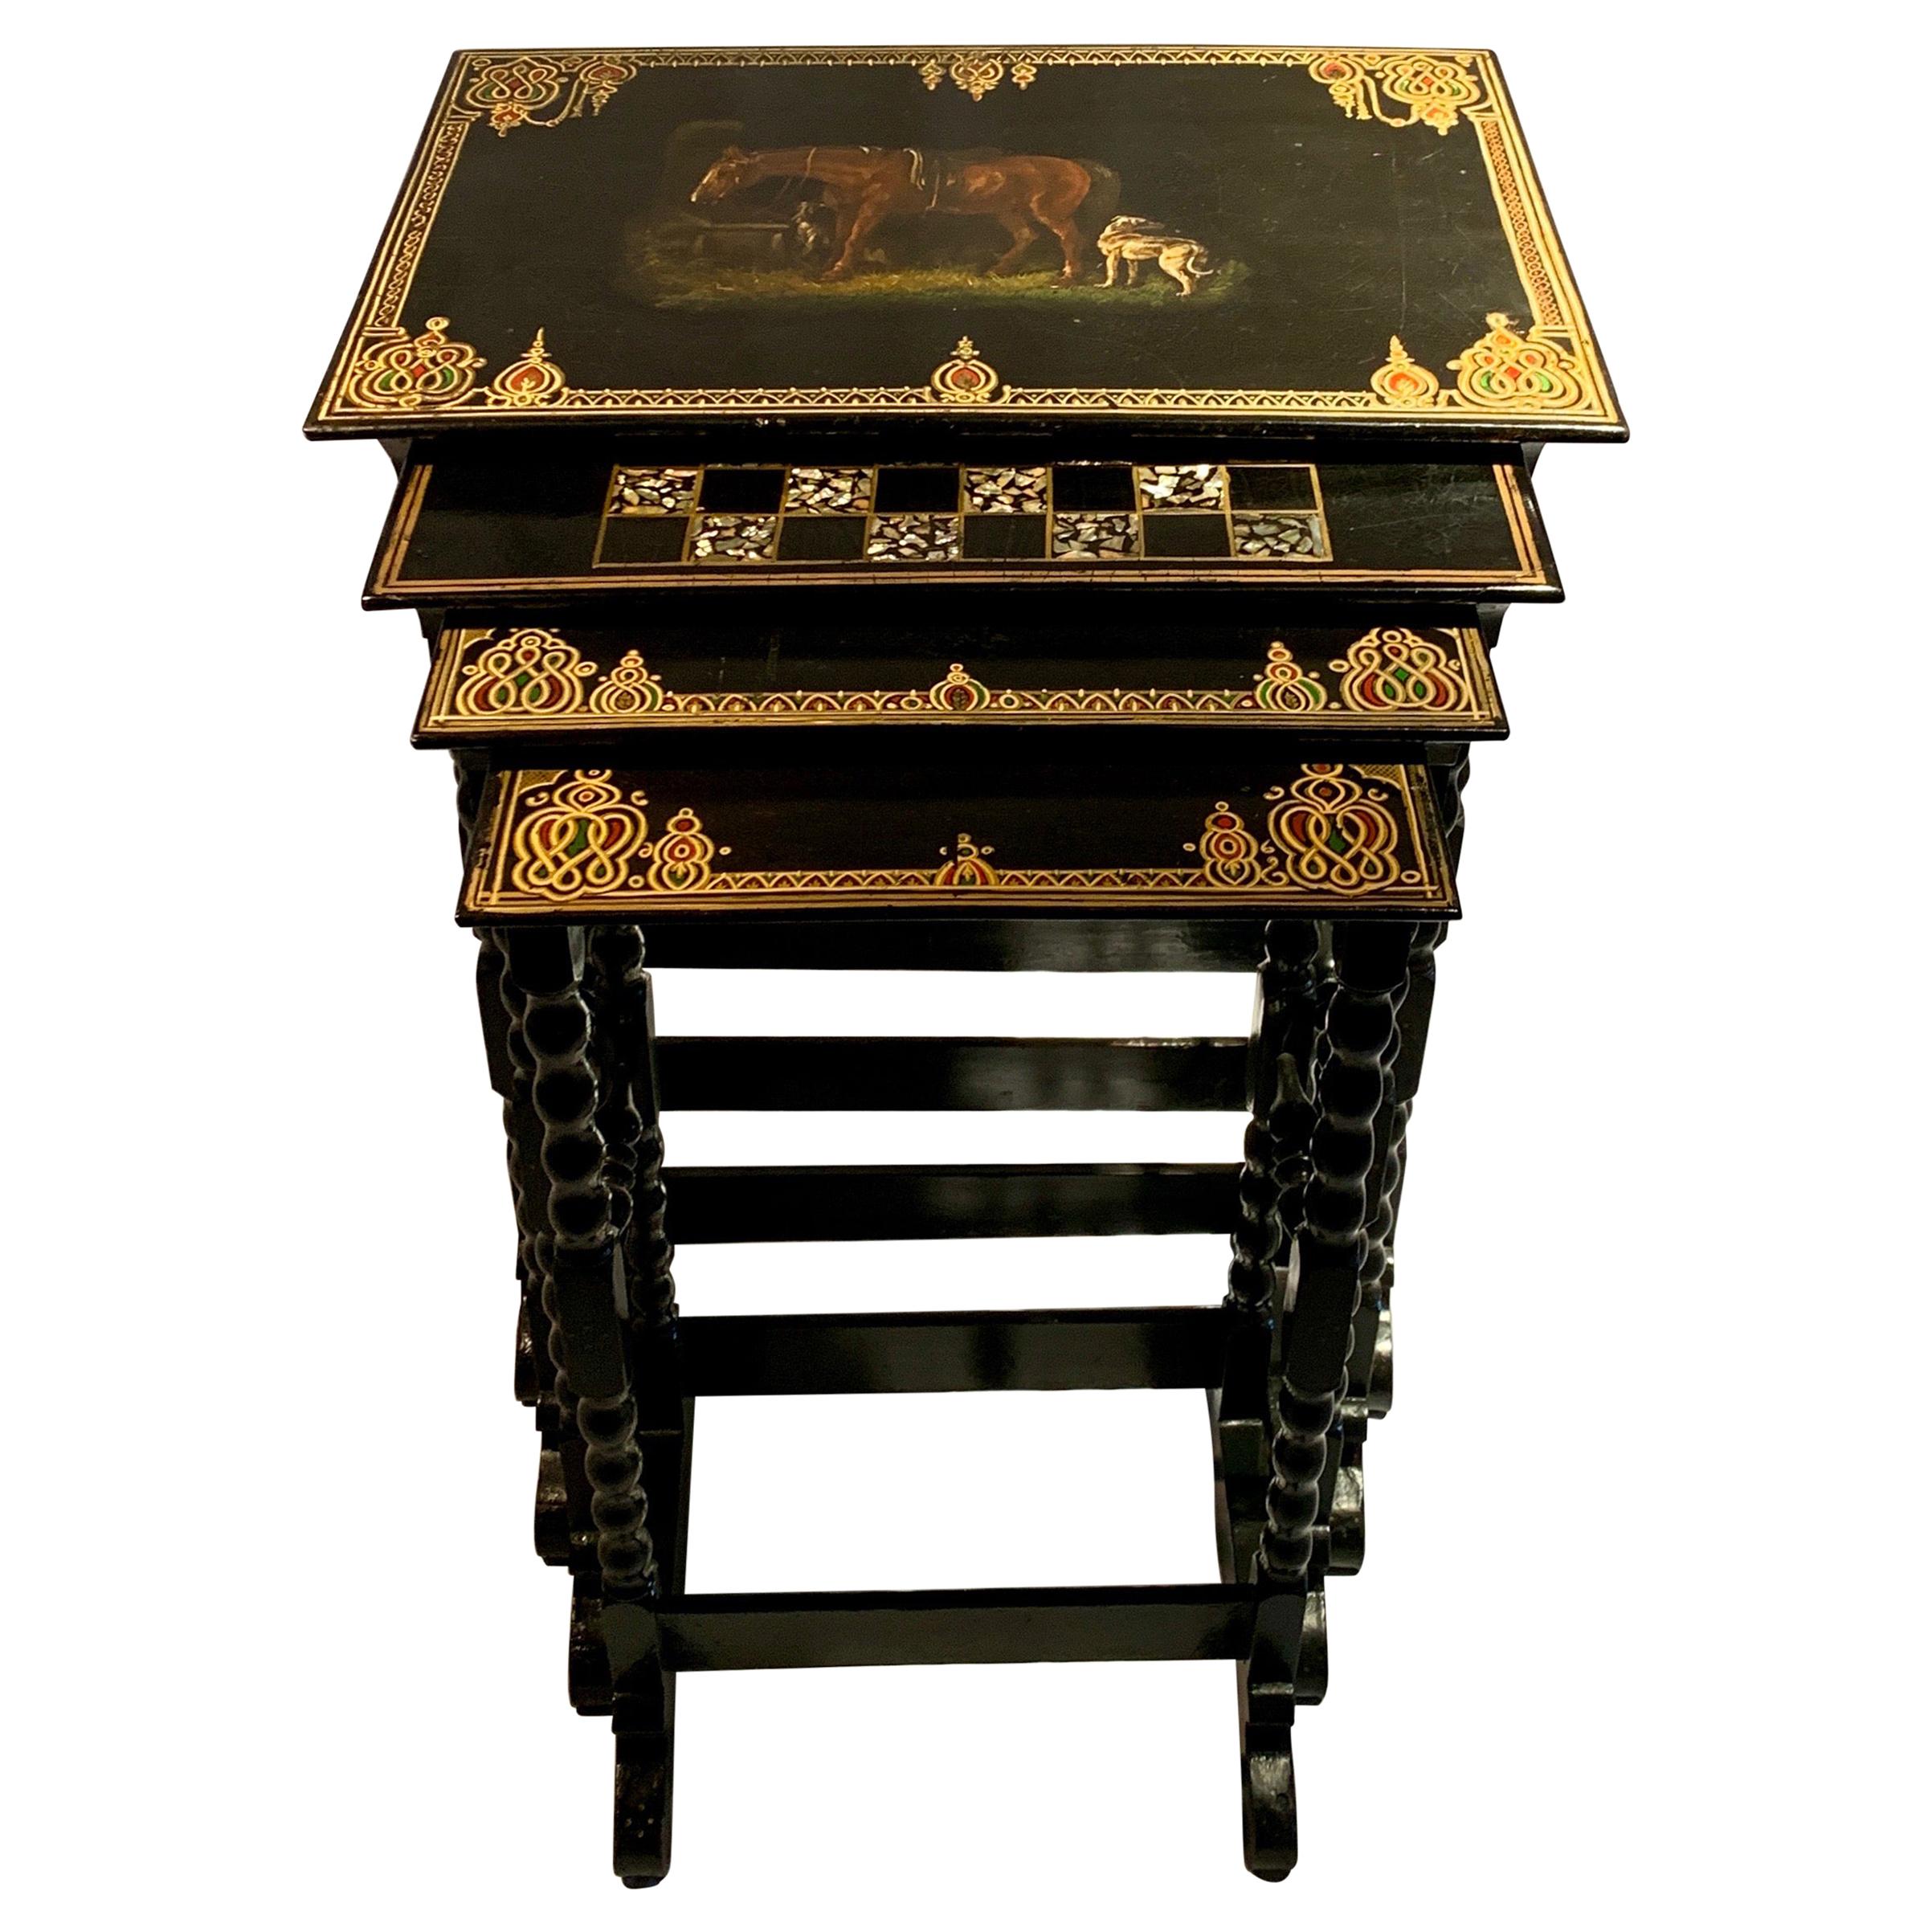 Antique Nest of Tables '4' Victorian Lacquer, circa 1870s For Sale